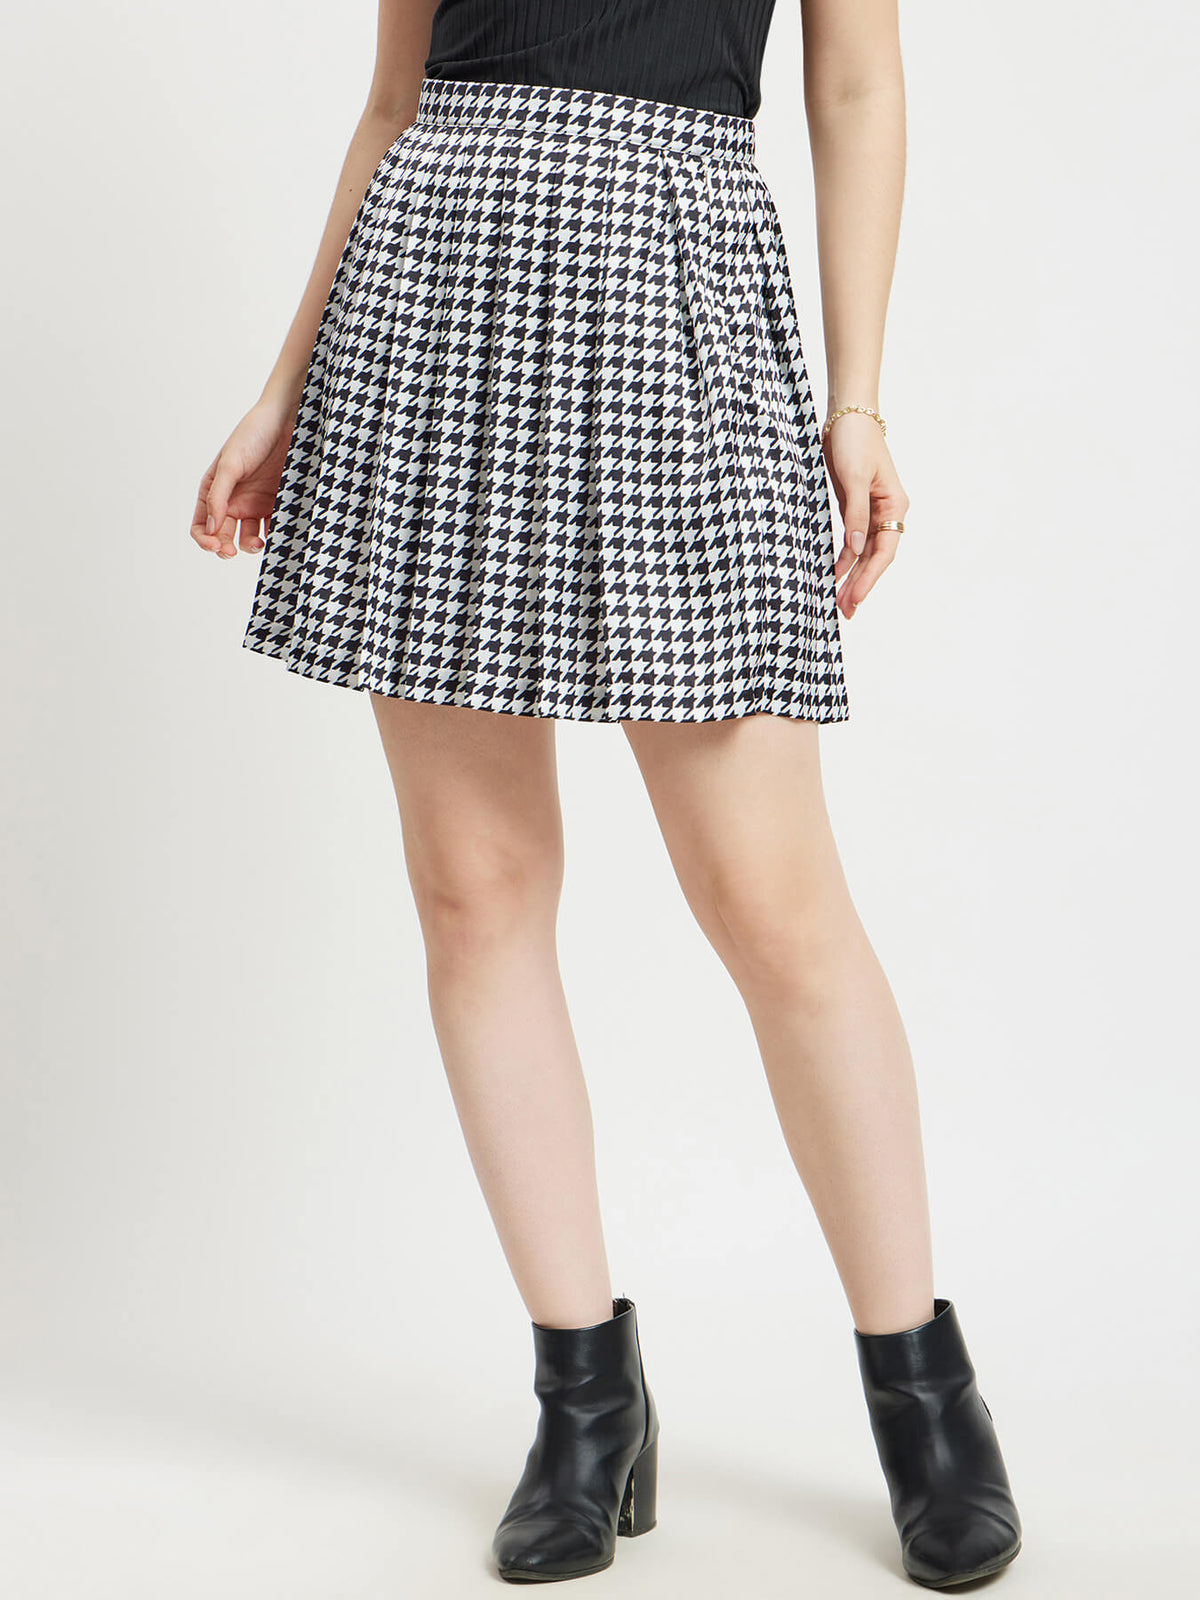 Satin Houndstooth Print Pleated Skirt - Black And White